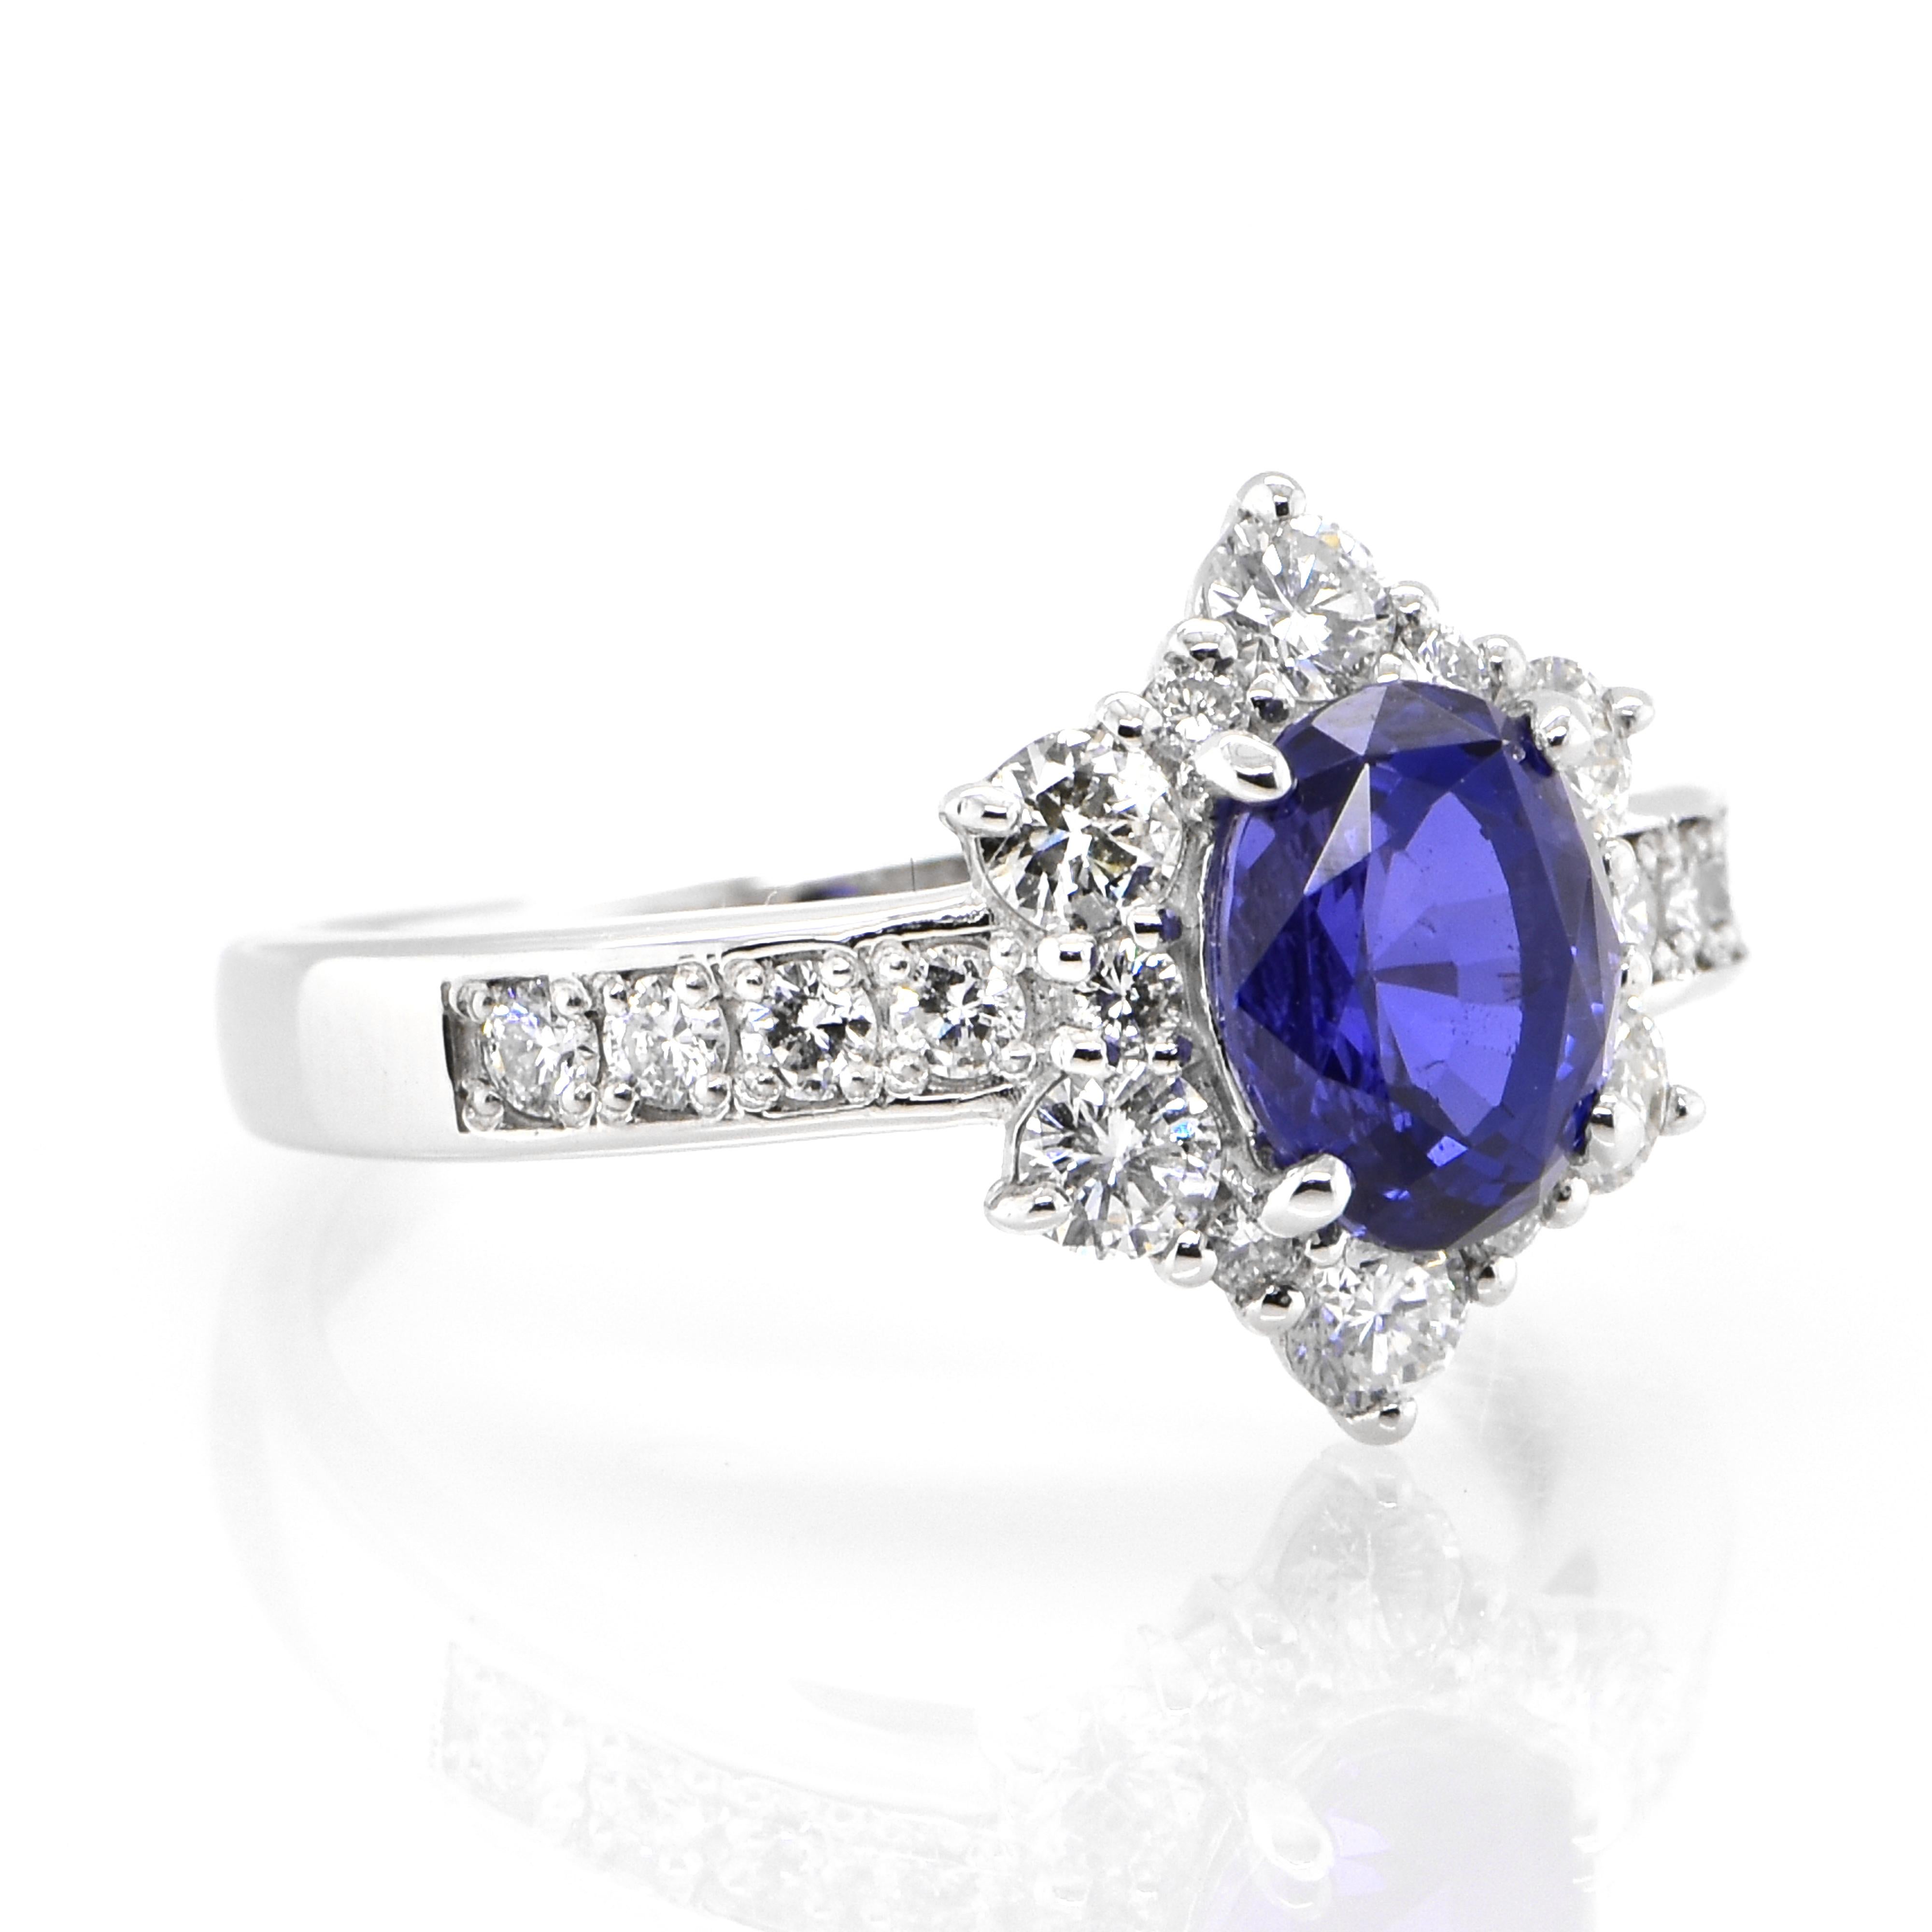 A beautiful ring featuring GIA Certified 2.02 Carat Natural Color-Change Sapphire and 0.74 Carats Diamond Accents set in Platinum. Sapphires have extraordinary durability - they excel in hardness as well as toughness and durability making them very